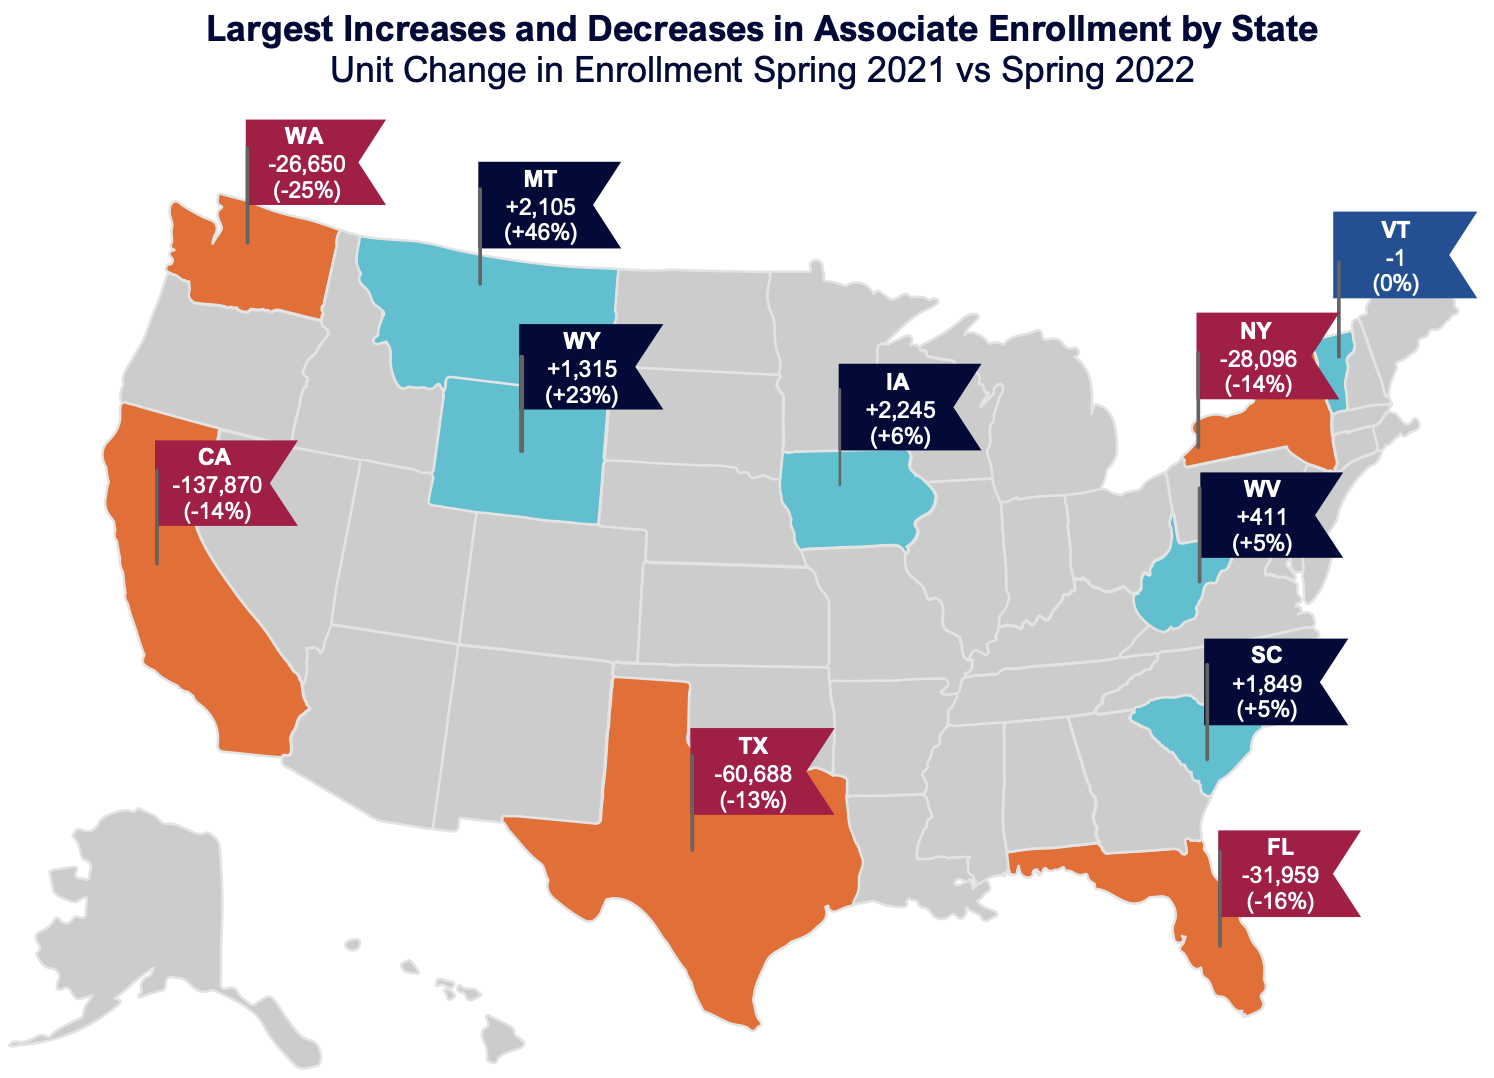 Largest increases and decreases in associate enrollment by state (Spring 2021 vs 2022)